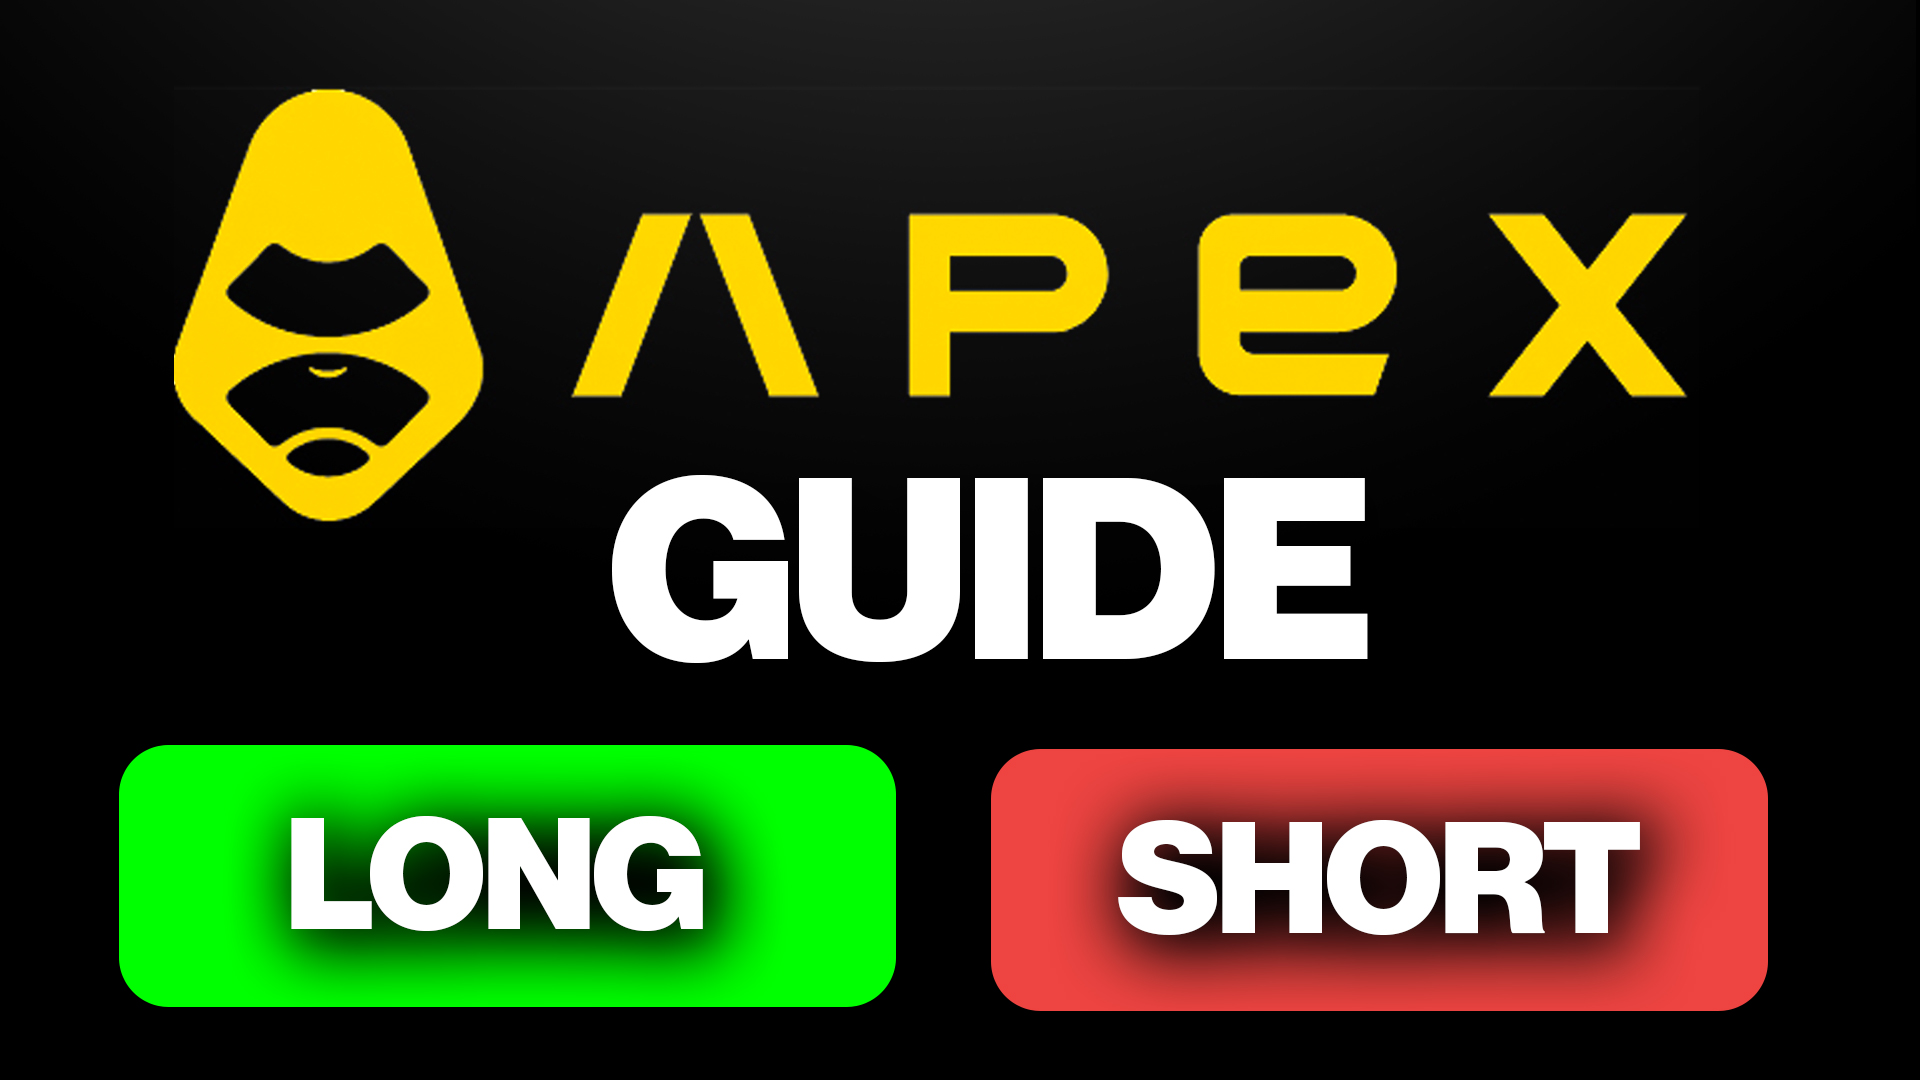 Apex Pro (DEX) Guide - How to Trade Bitcoin on Apex Pro Decentralised Exchange